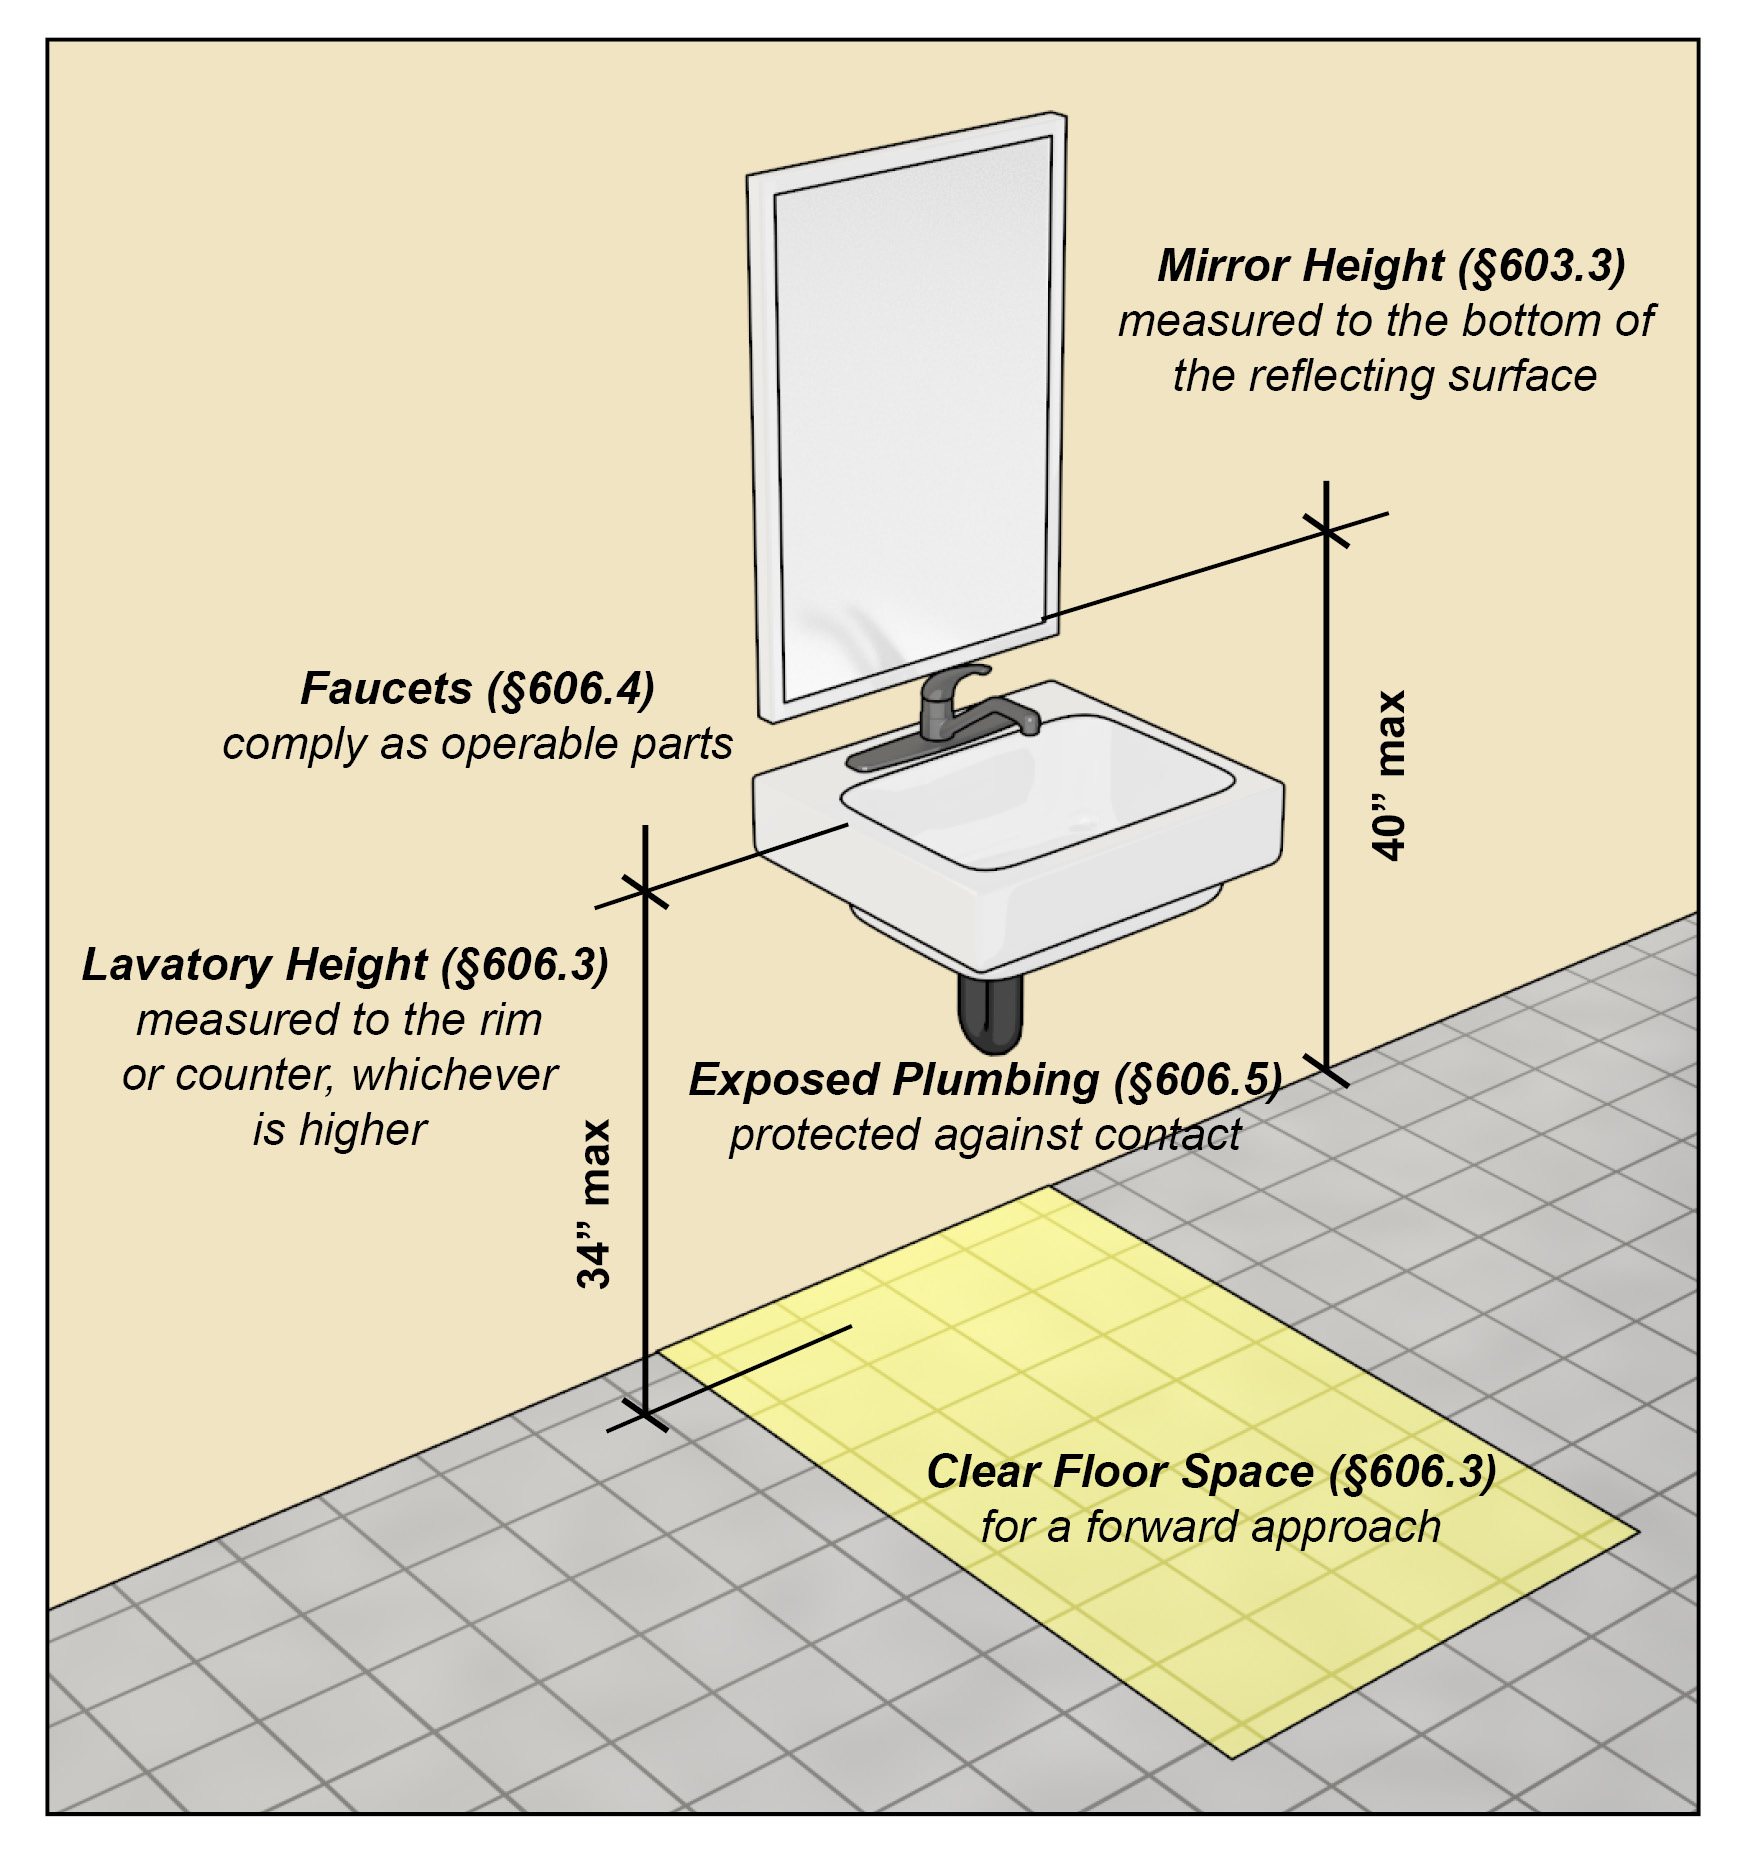 Wall-mounted lavatory with mirror and highlighted clear floor space.